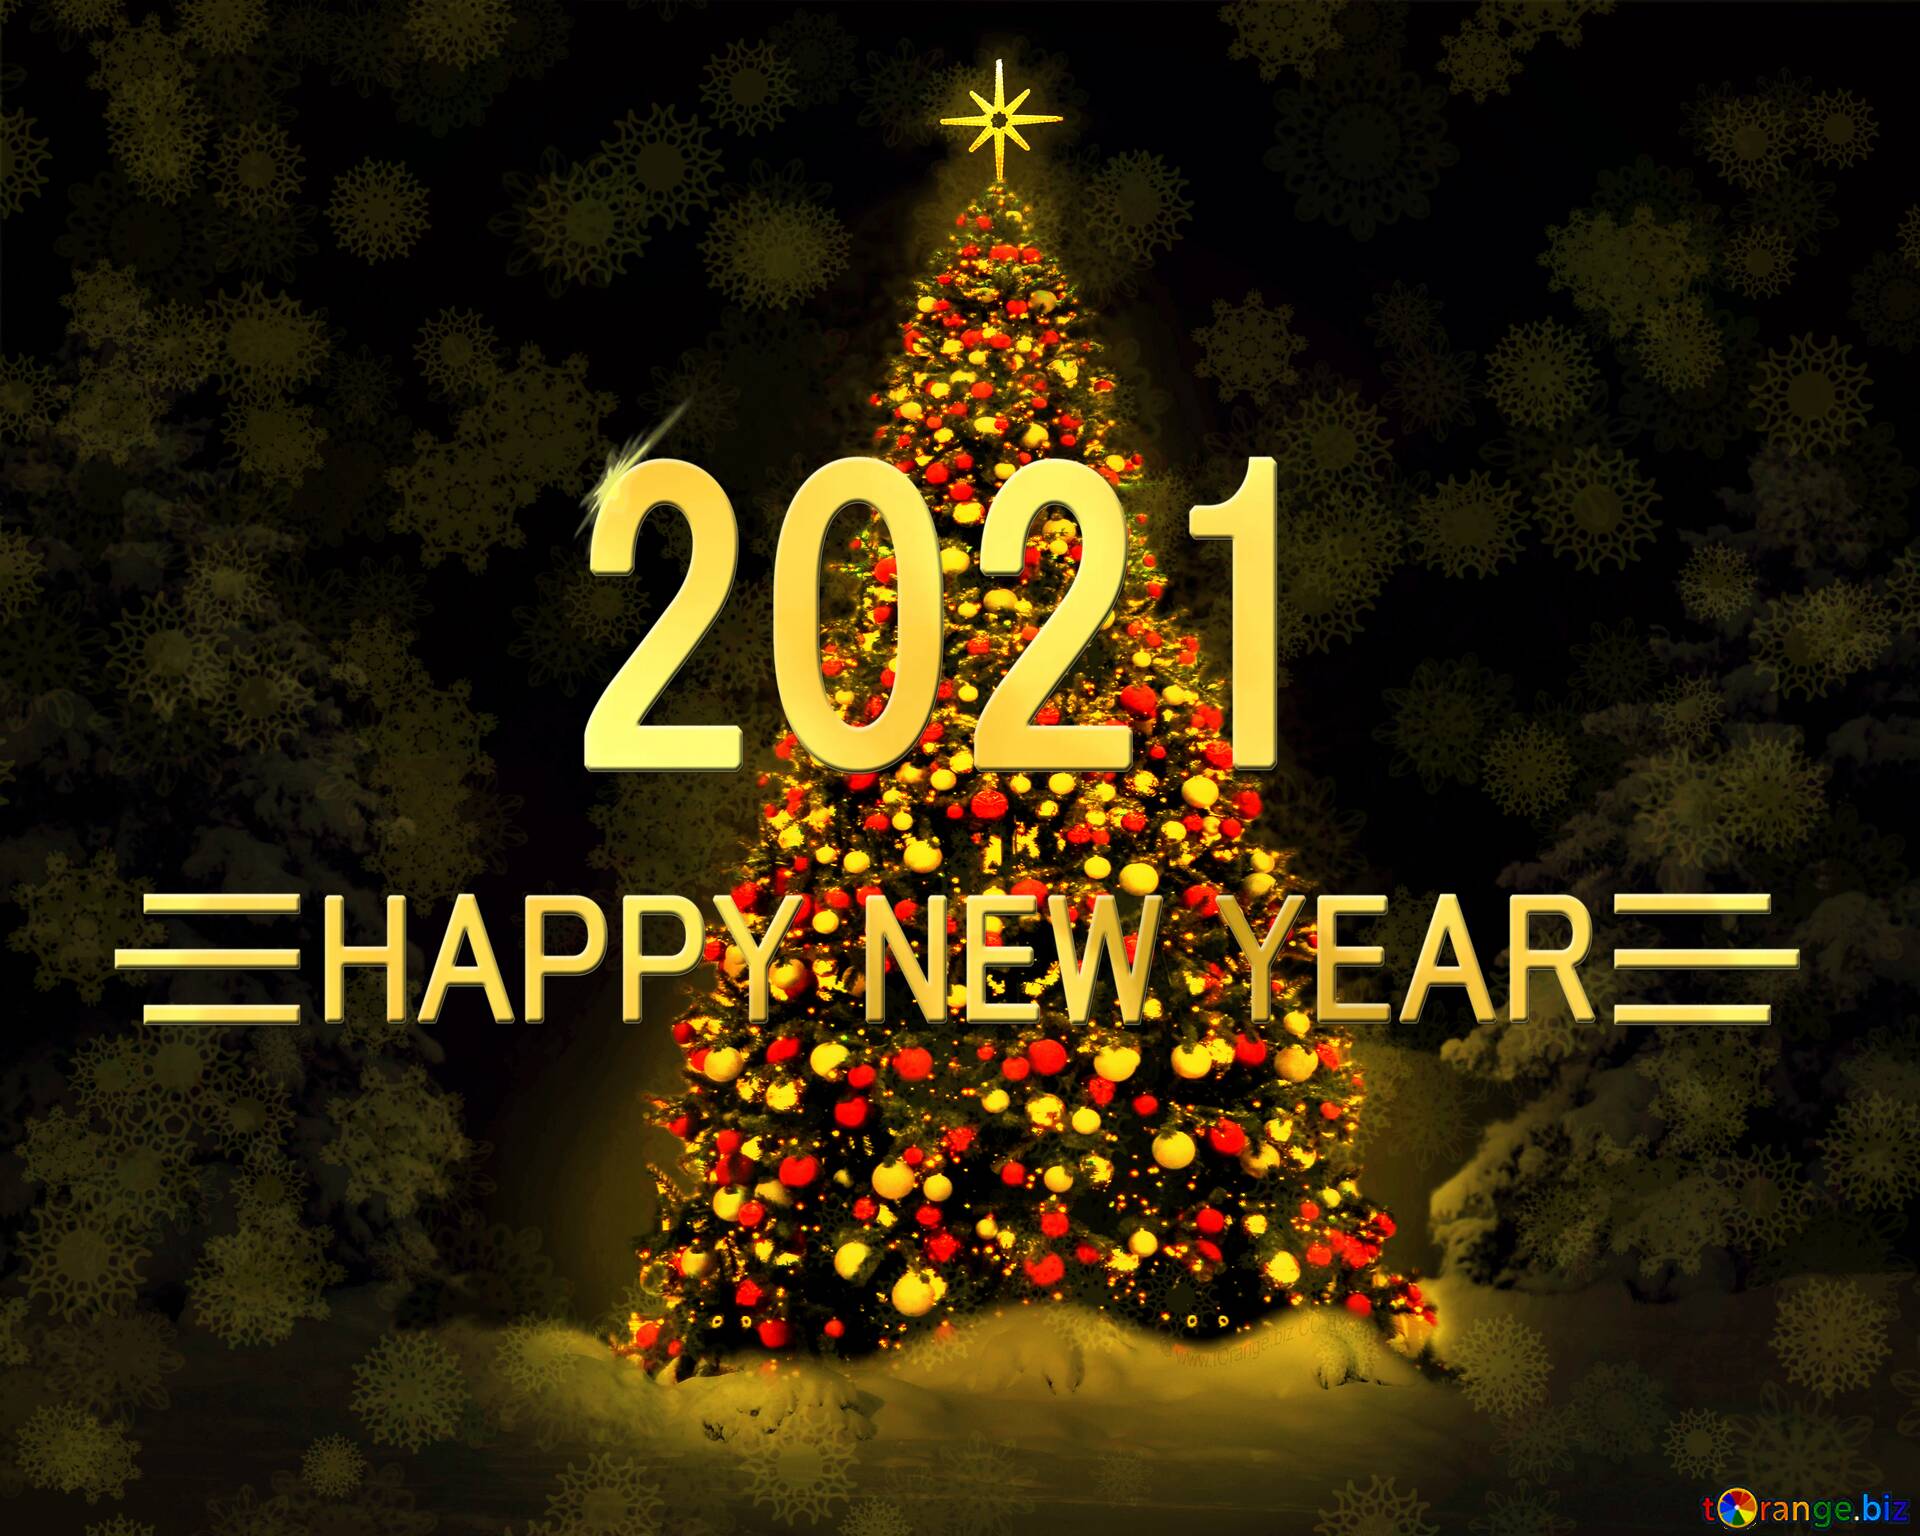 1920x1536 Download Free Picture Christmas Tree Shiny Happy New Year 2022 Background On Cc By License Free Image Stock Fx 141075